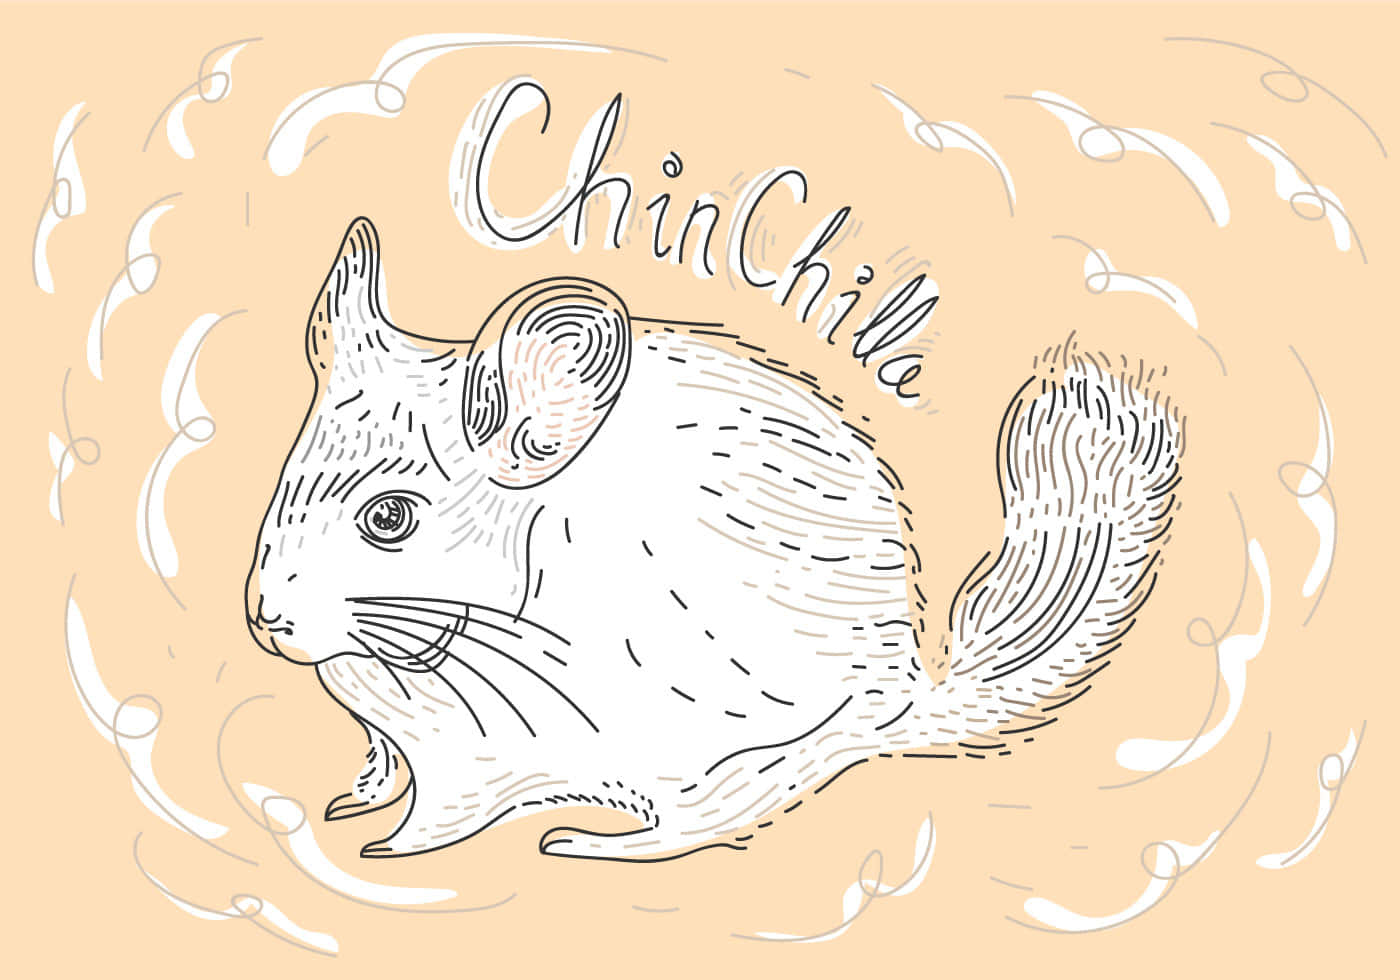 "This cute chinchilla is ready to find its forever home!"